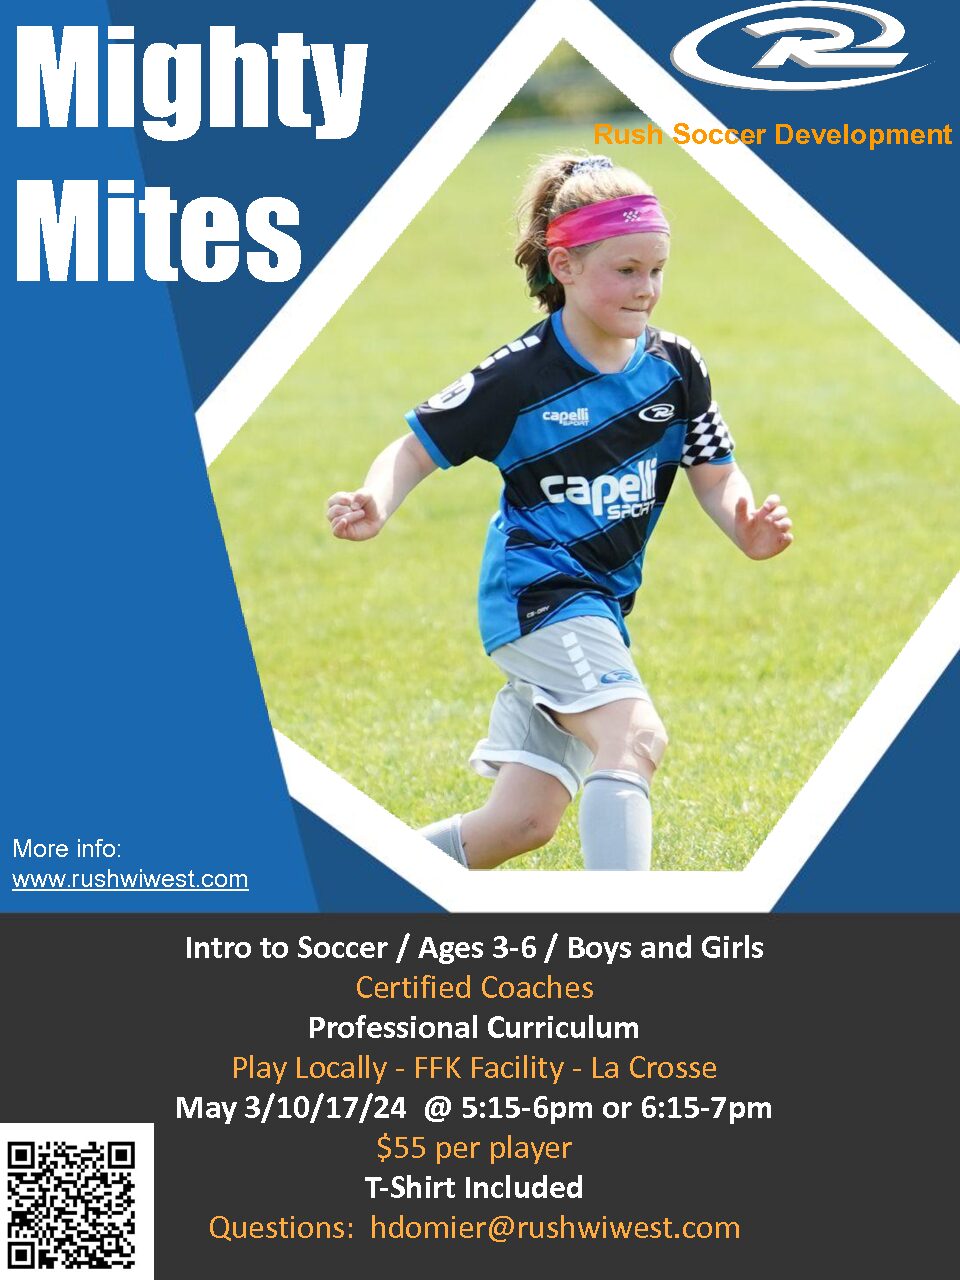 Mighty Mites Soccer